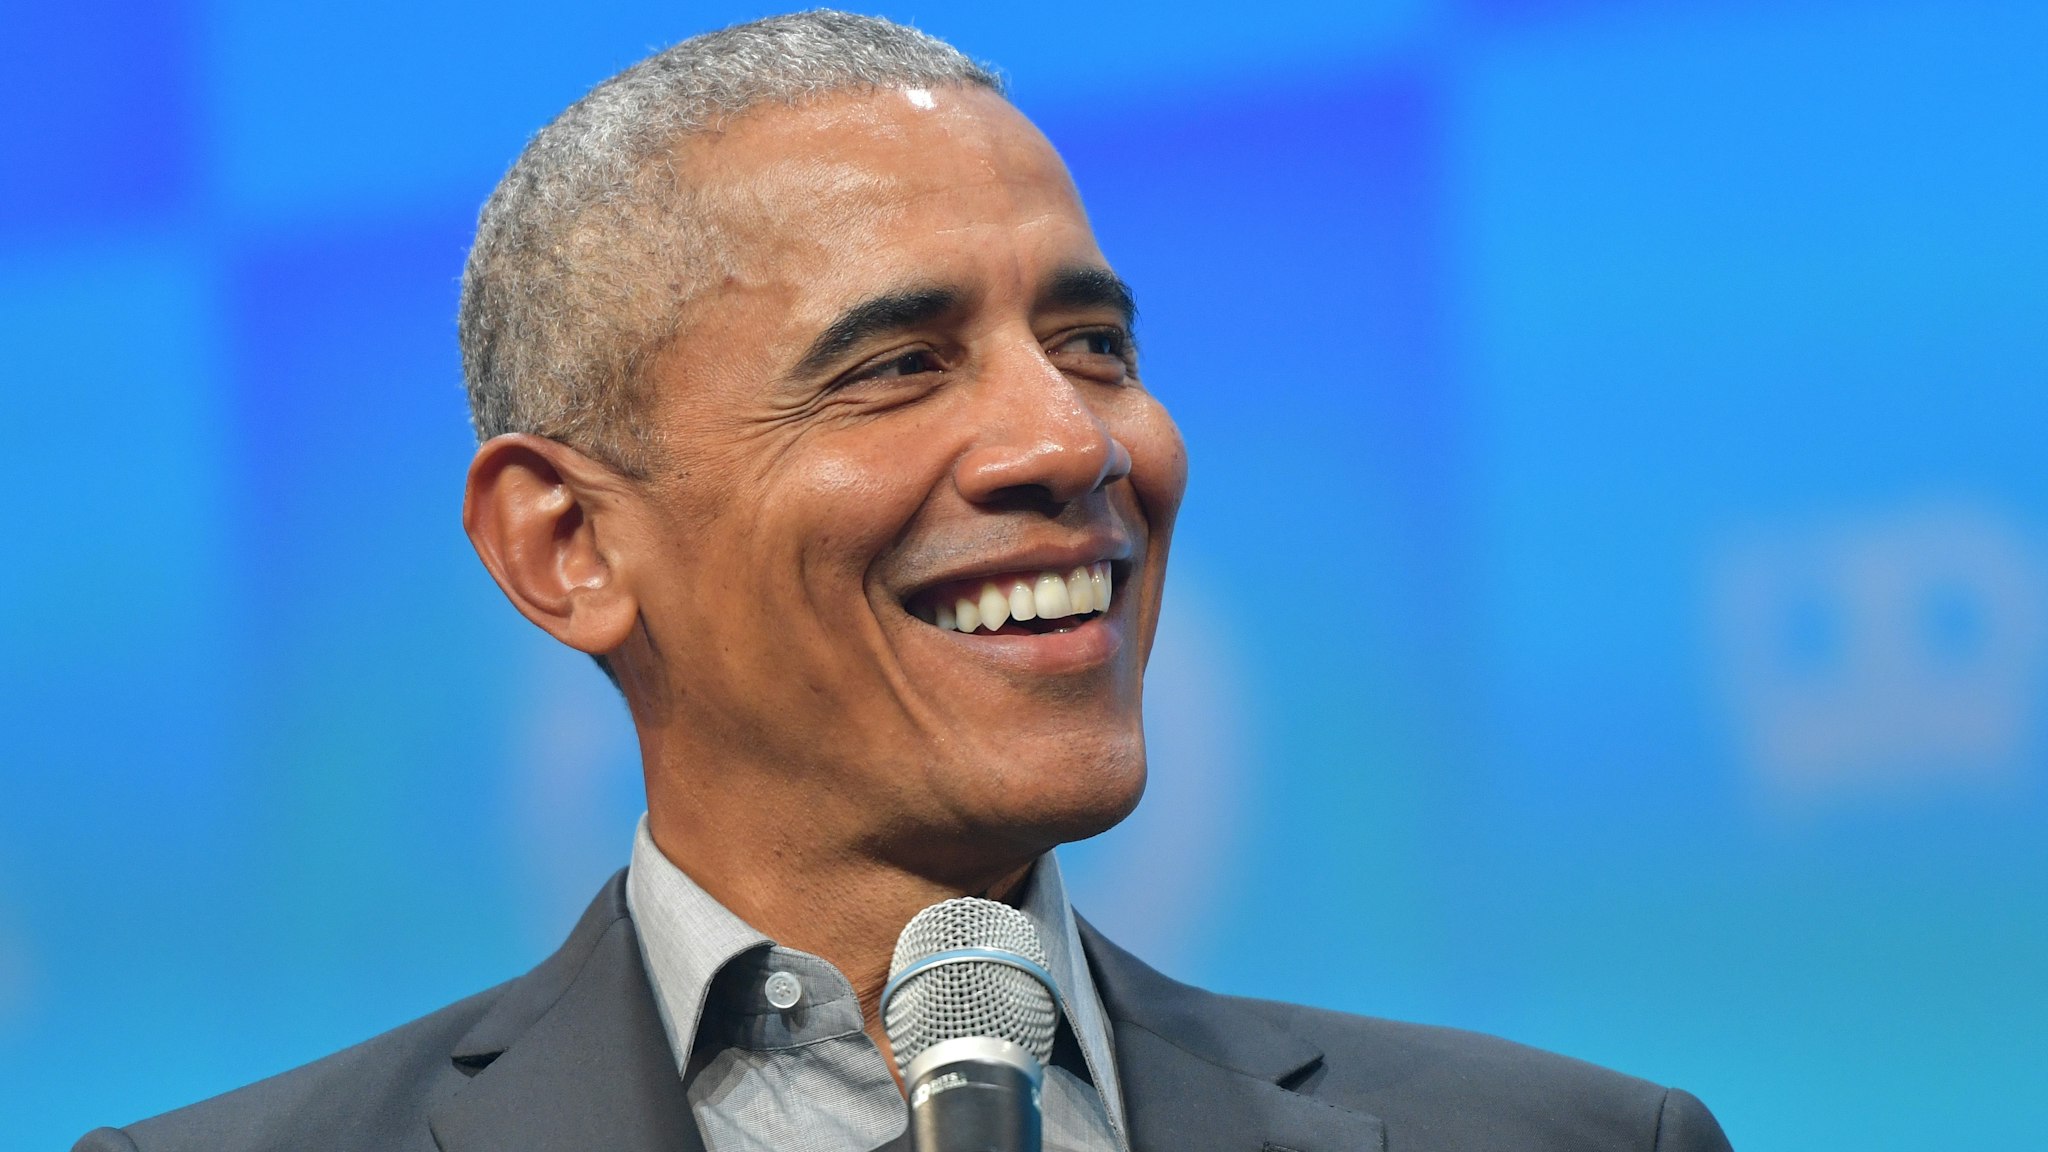 MUNICH, GERMANY - SEPTEMBER 29: Former U.S. President Barack Obama speaks at the opening of the Bits &amp; Pretzels meetup on September 29, 2019 in Munich, Germany. The annual event brings together founders and startups from across the globe for three days of networking, talks and inspiration. during the "Bits &amp; Pretzels Founders Festival" at ICM Munich on September 29, 2019 in Munich, Germany. Bits &amp; Pretzels is an application-only, three-day festival that connects 5,000 founders, investors, startup enthusiasts,taking place from September 29 to October 1, 2019.